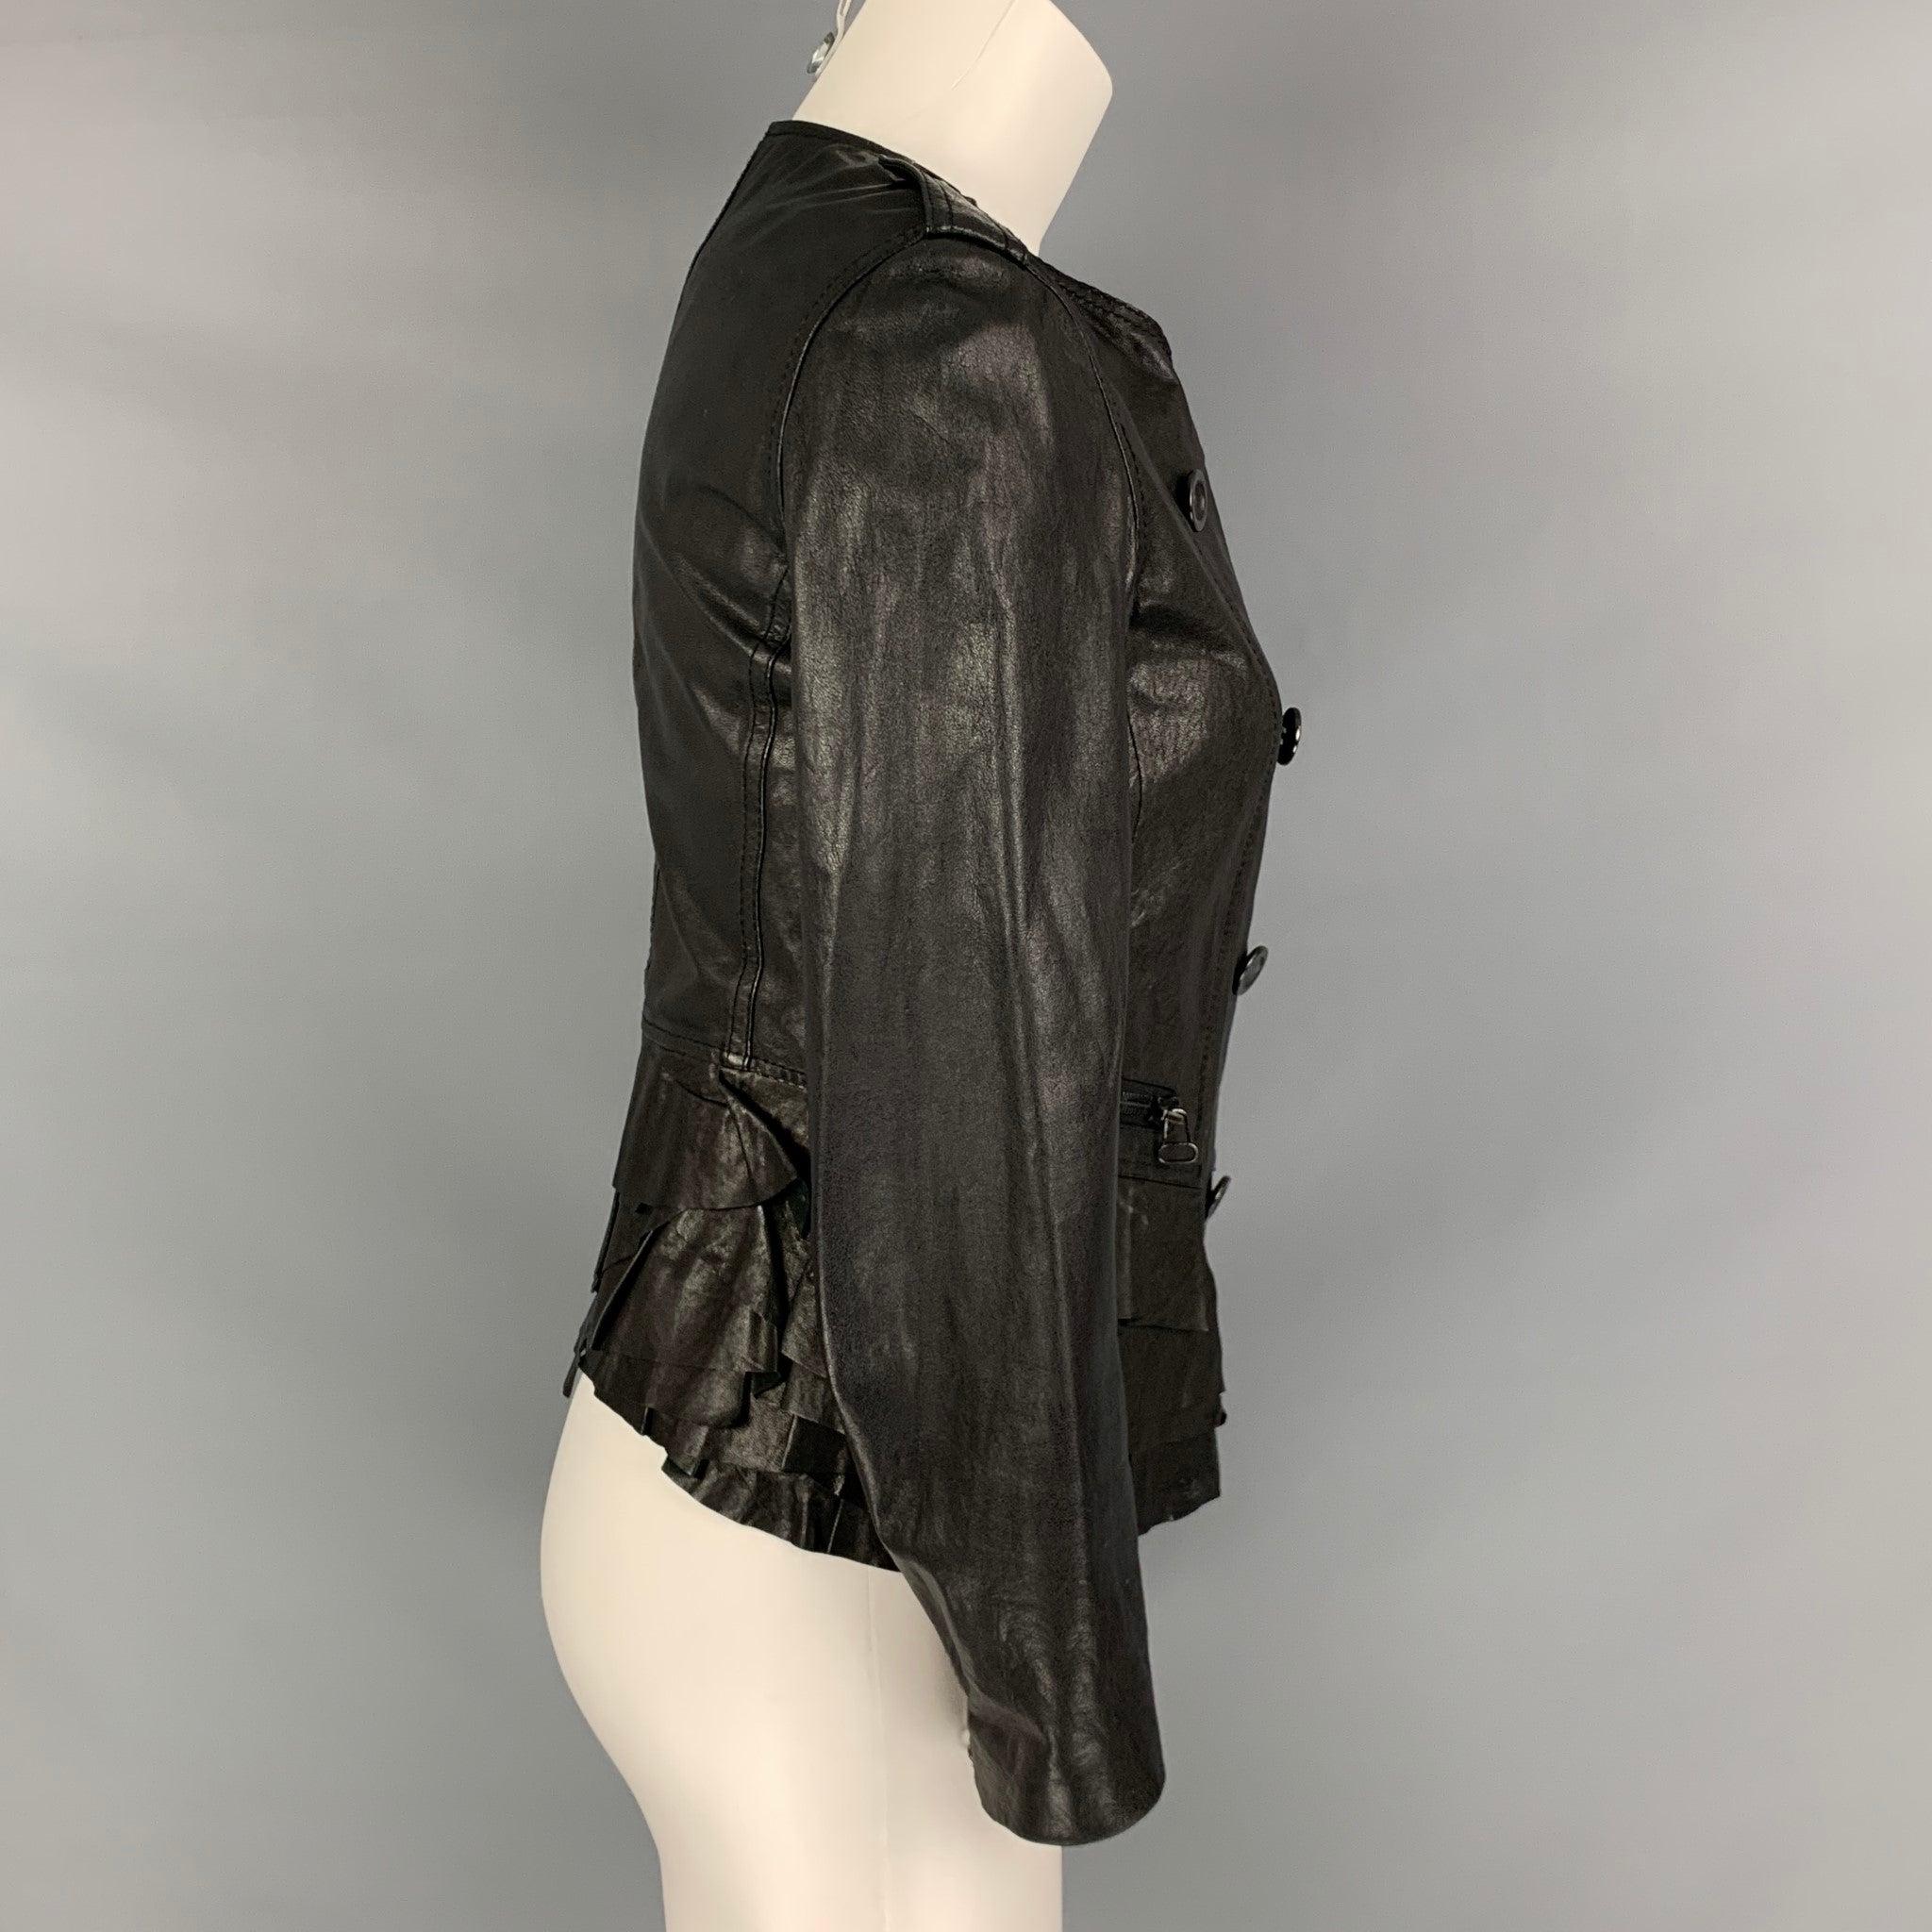 3.1 PHILLIP LIM jacket comes in a black leather featuring a motorcycle style, double breasted, epaulettes, ruffles detail at bottom back, and a zip up closure. Very Good Pre- Owned Conditions. 

Marked:   2 

Measurements: 
 
Shoulder: 15 inches